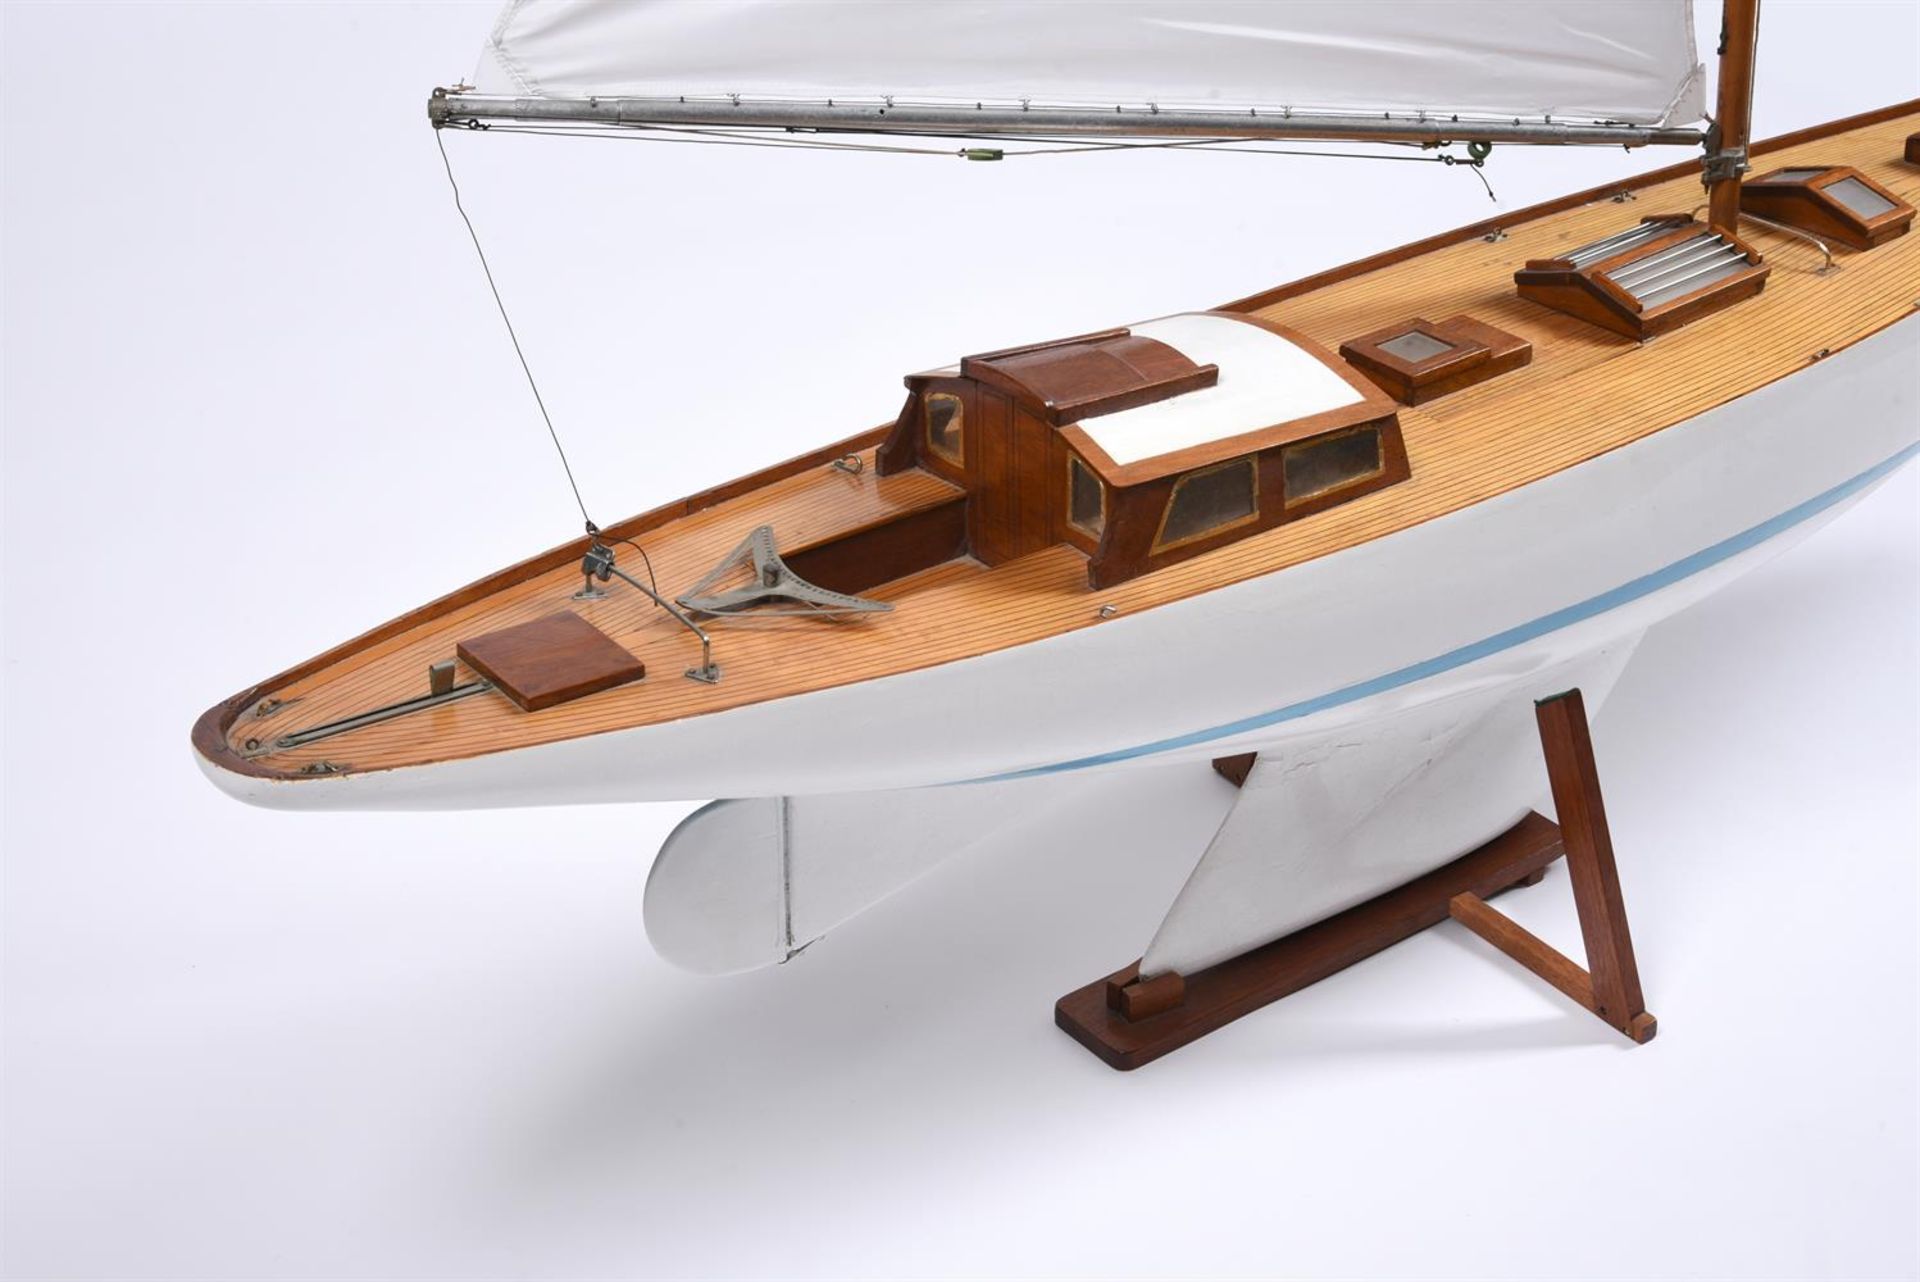 A MODERN PAINTED AND VARNISHED WOOD MODEL OF A POND YACHTThe mast and sail above the white hull and - Image 4 of 5